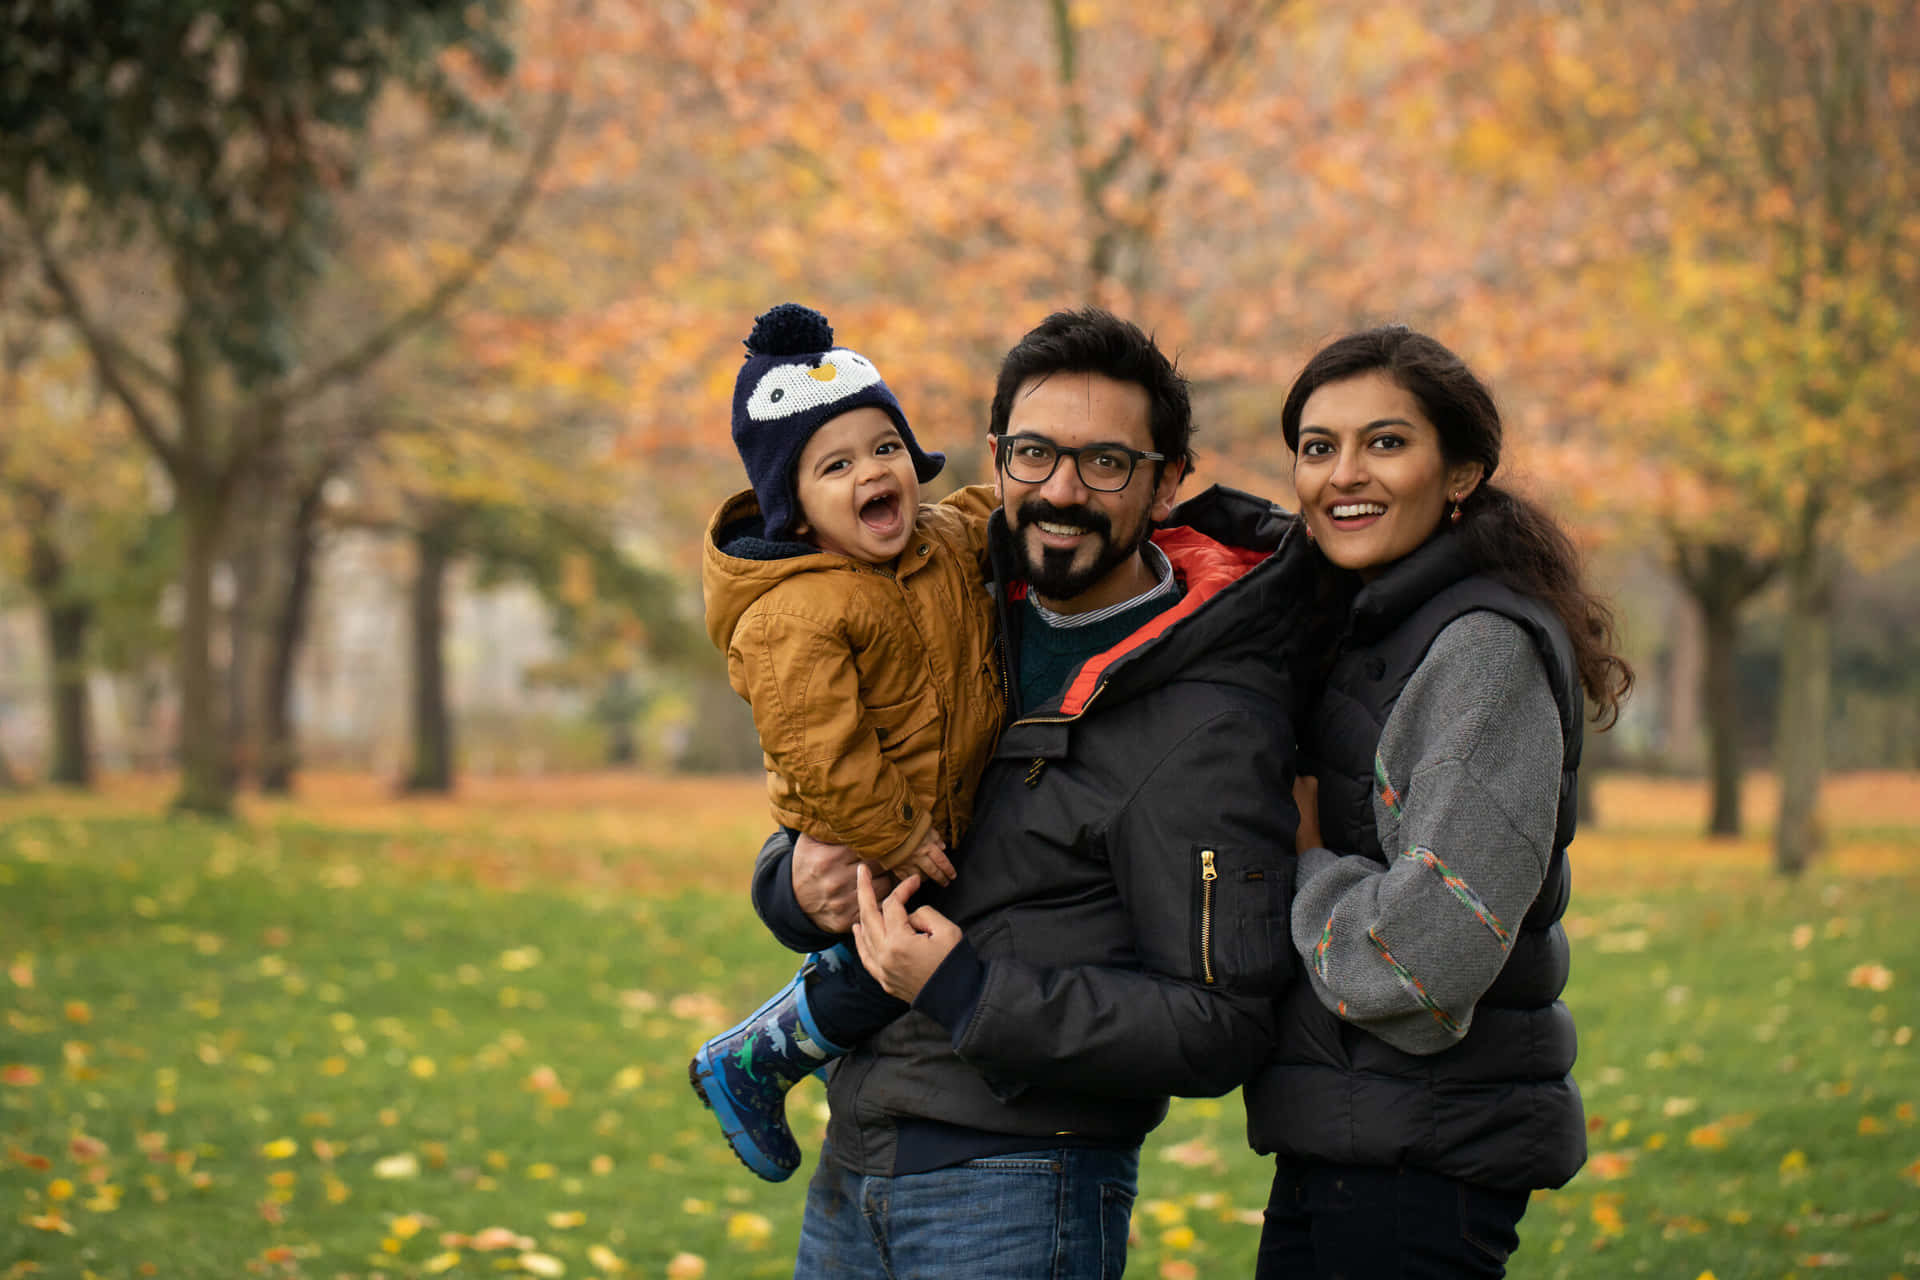 A Family Poses For A Photo In The Park